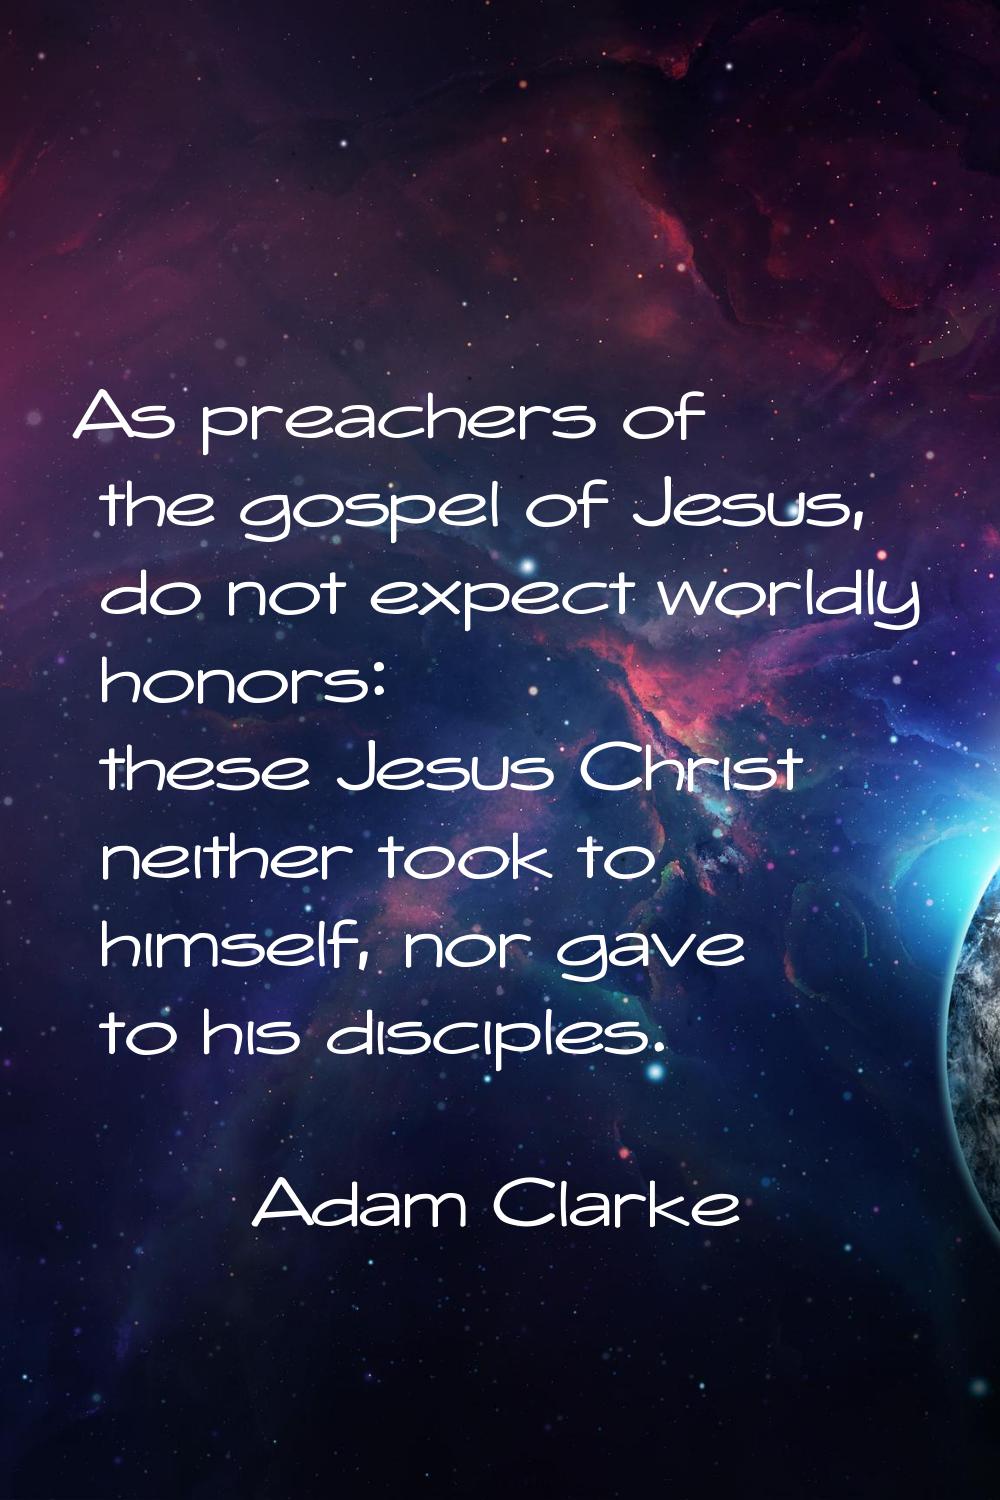 As preachers of the gospel of Jesus, do not expect worldly honors: these Jesus Christ neither took 